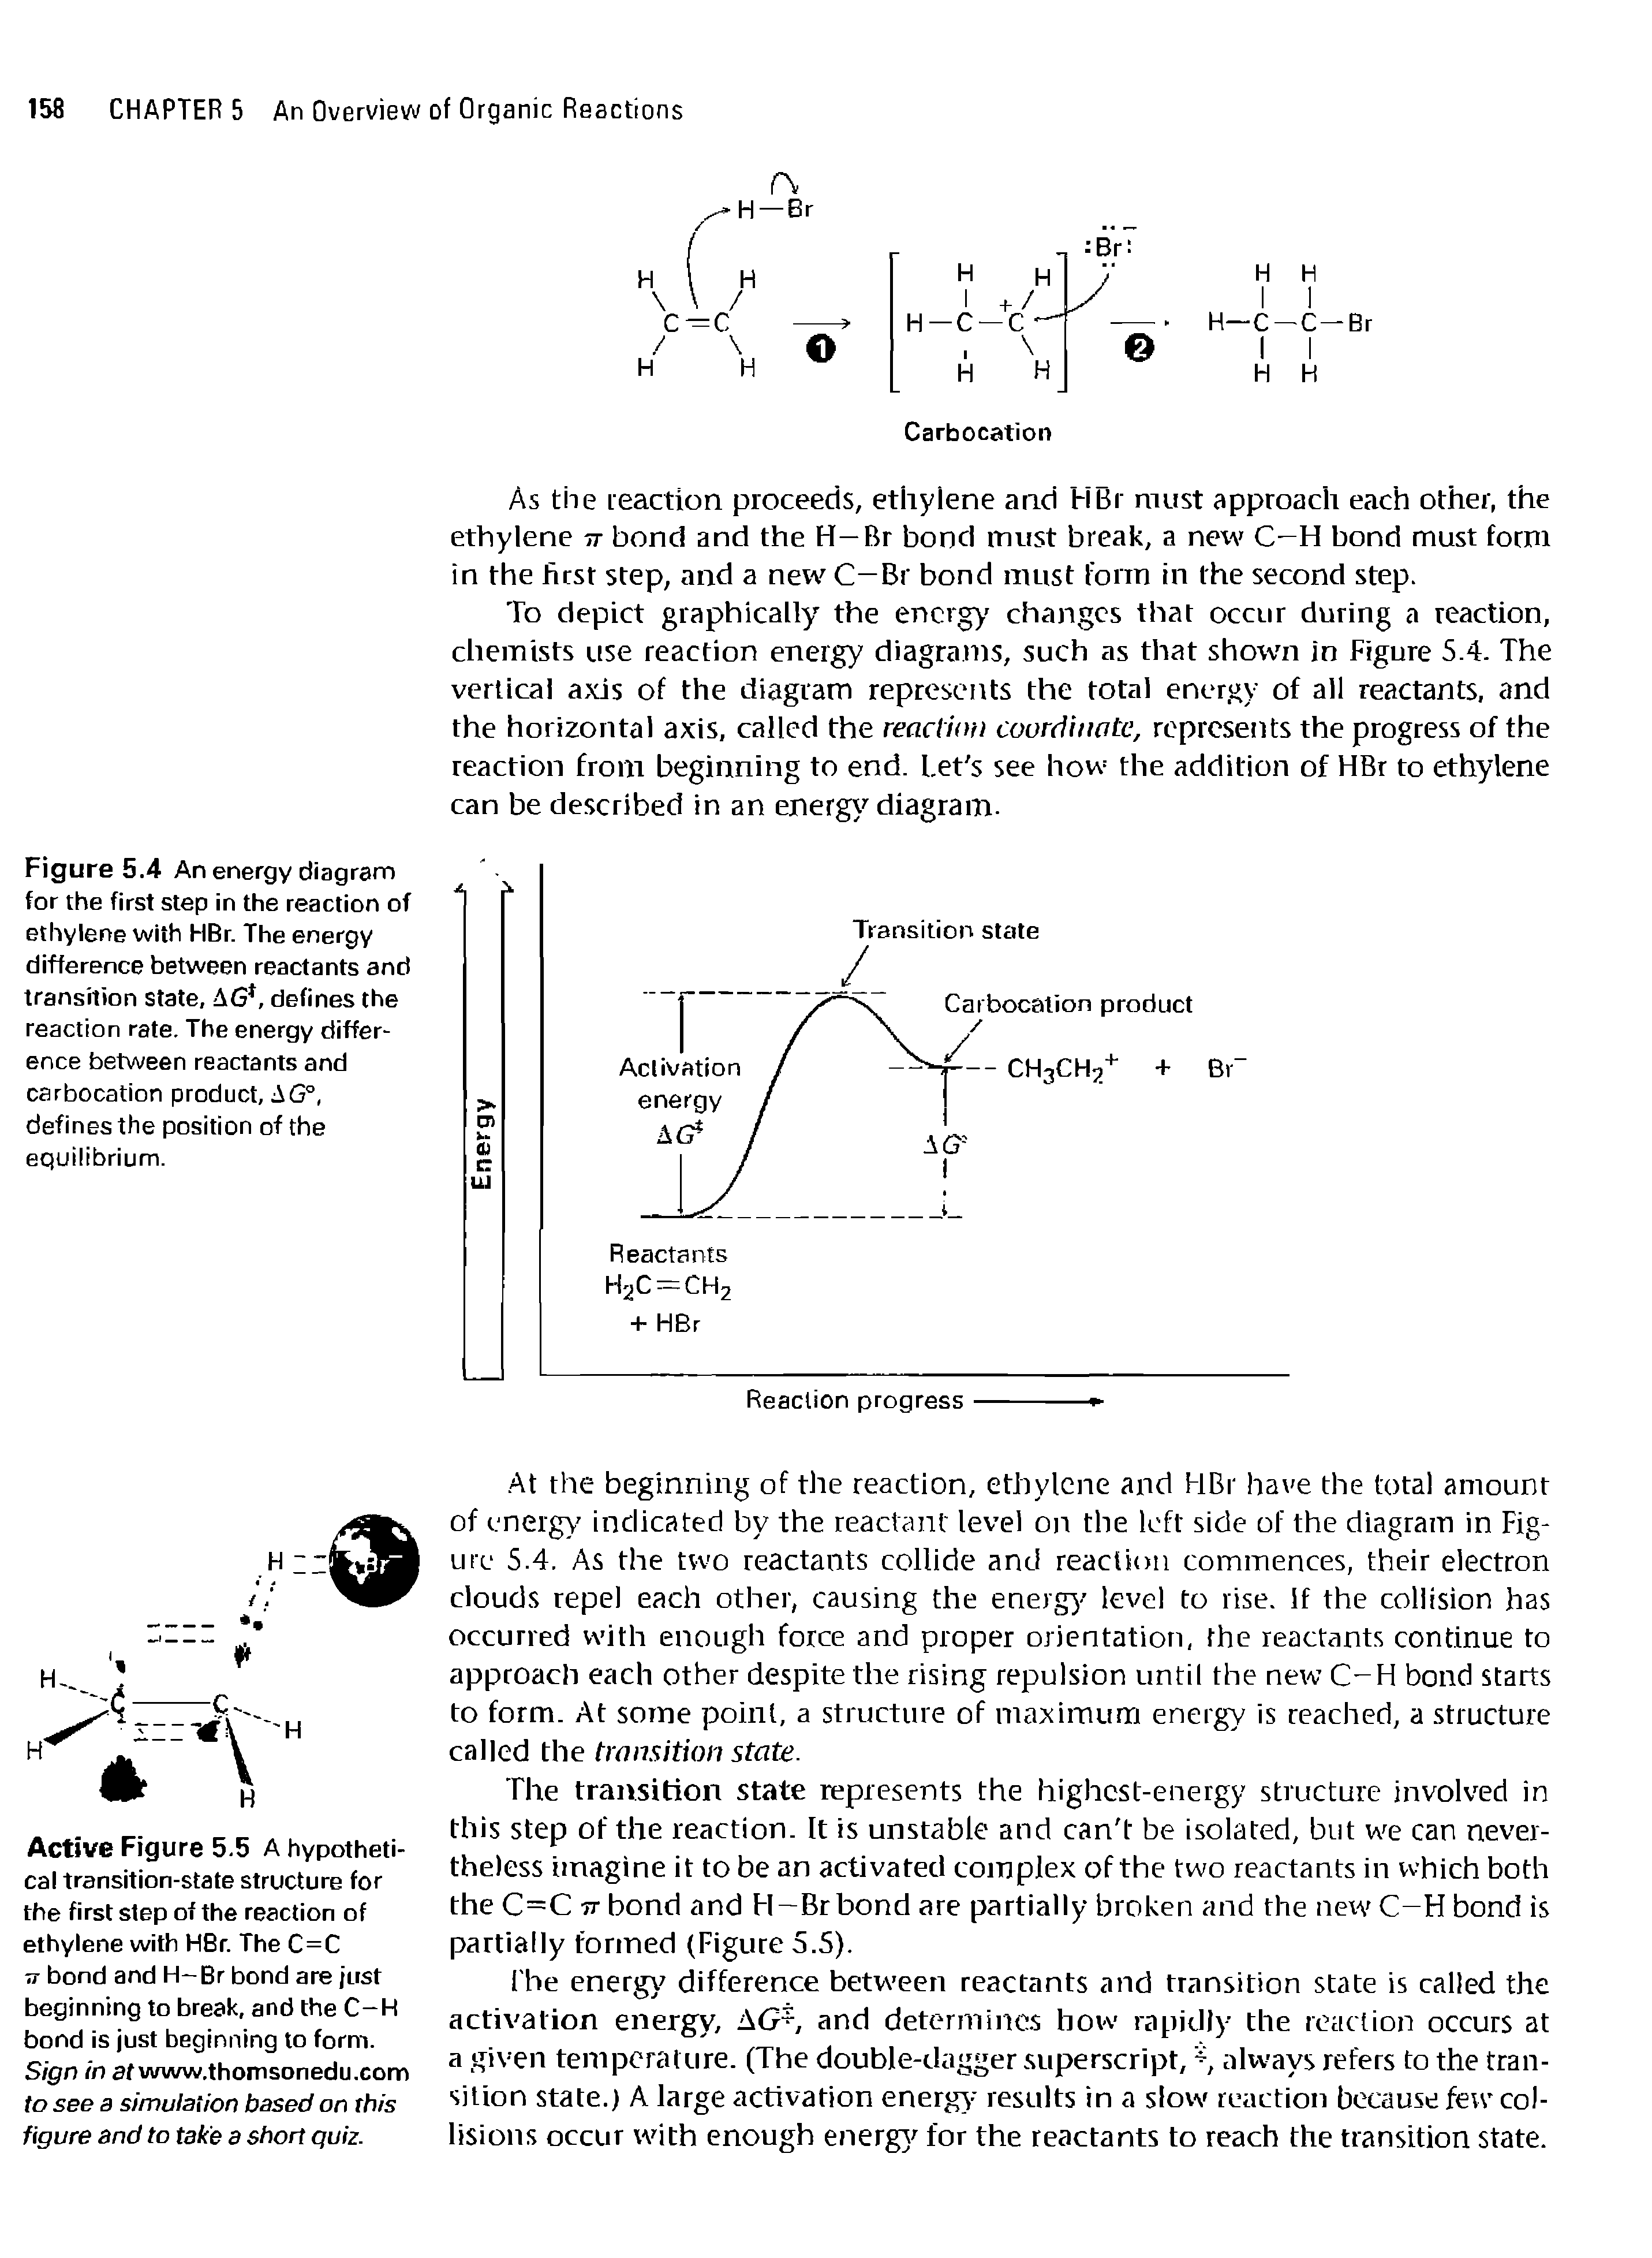 Figure 5.4 An energy diagram for the first step in the reaction of ethylene with HBr. The energy difference between reactants and transition state, AG, defines the reaction rate. The energy difference between reactants and carbocation product, AG°, defines the position of the equilibrium.